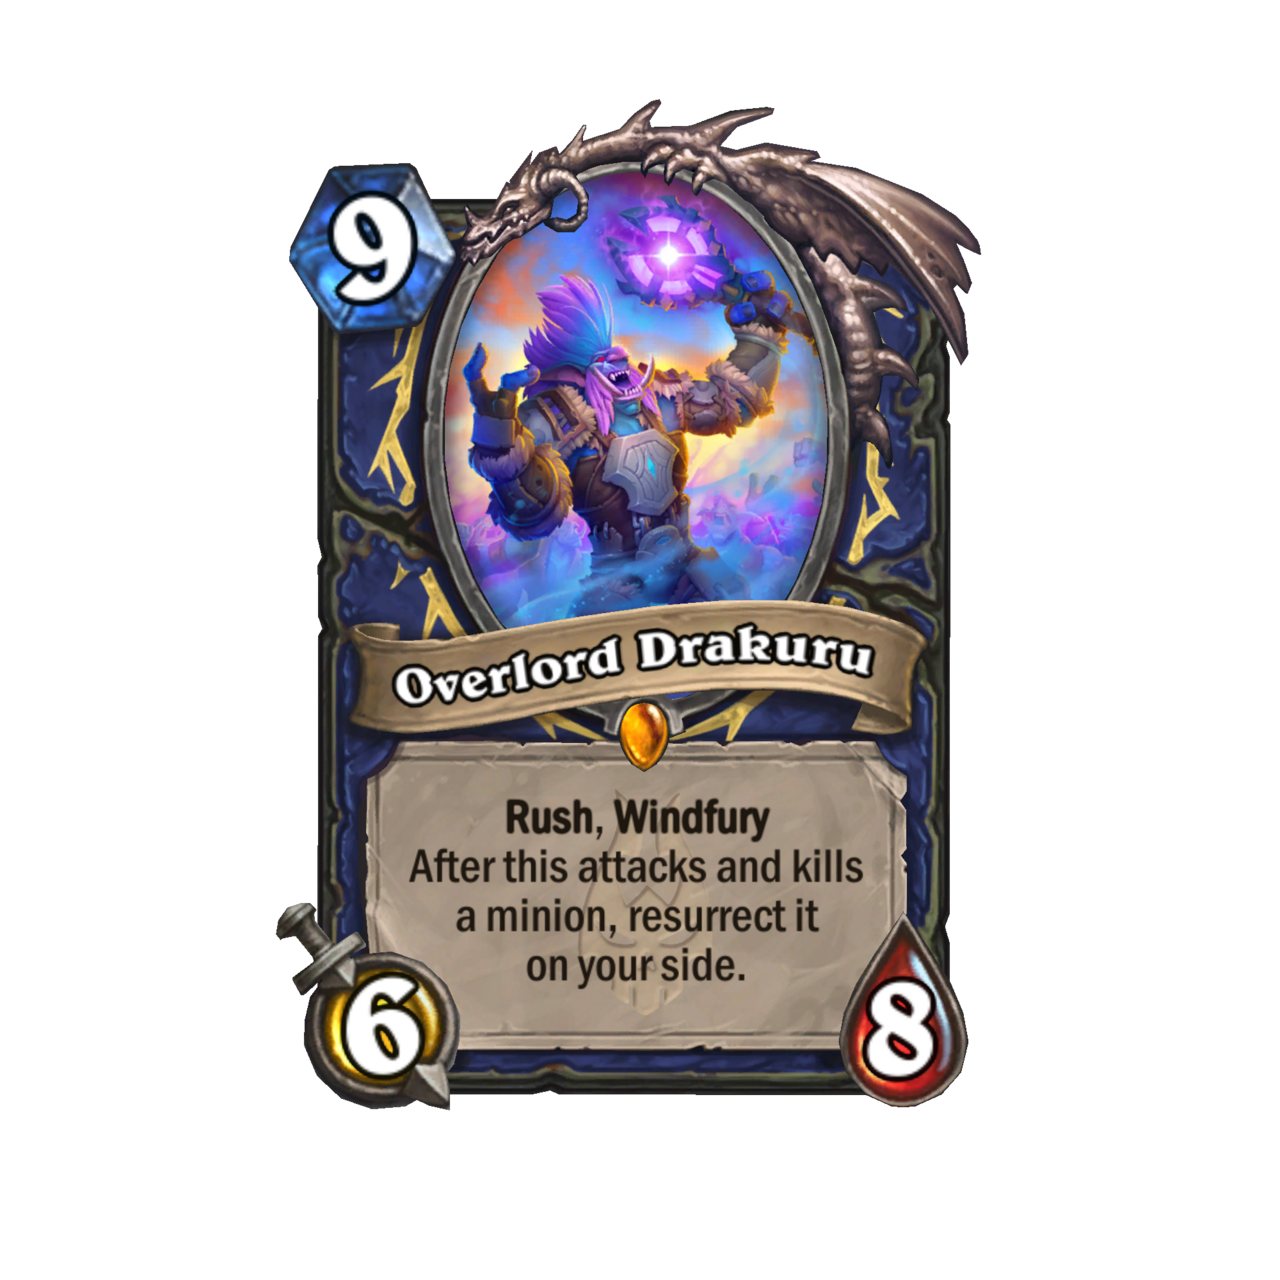 Great Drakuru - Haste, Wind.  After this attack and kill a minion, resurrect it on your side.